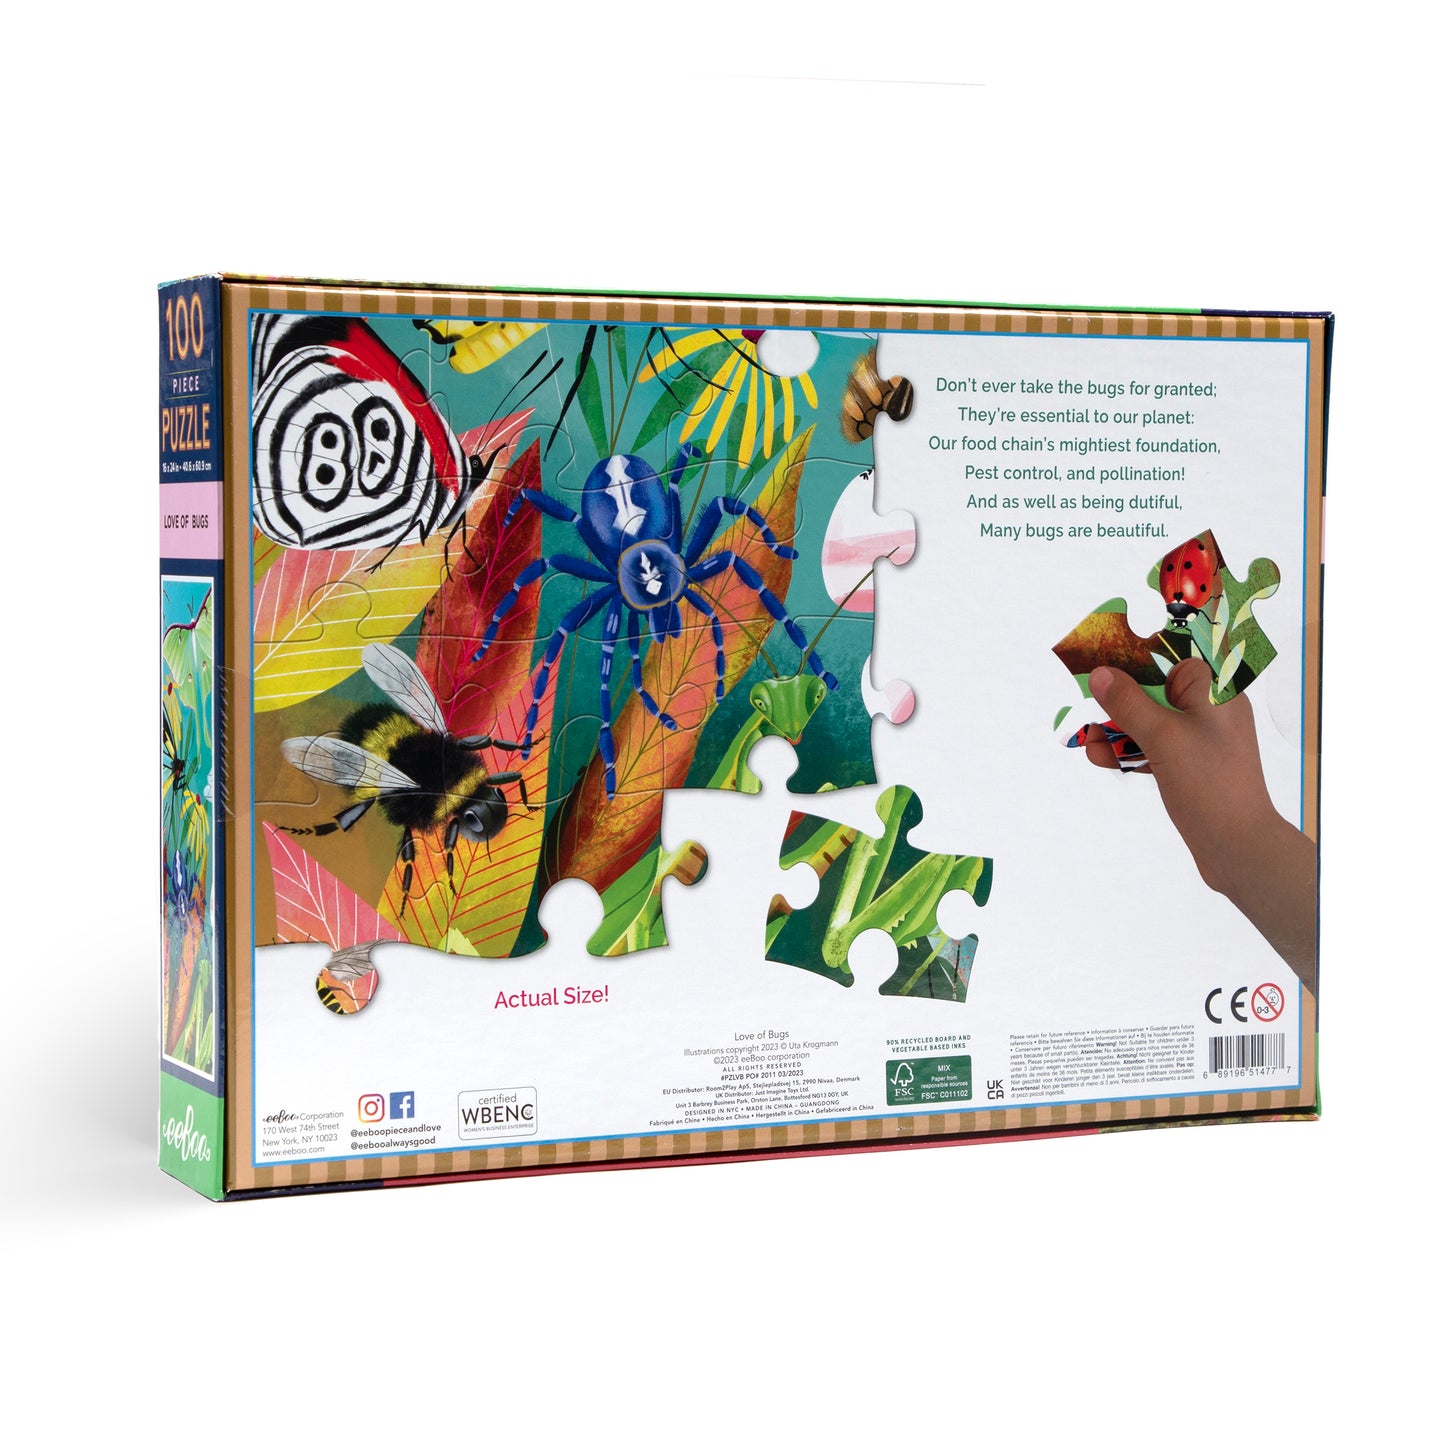 Love of Bugs 100 Piece Puzzle | Unique Fun Gifts for Kids Ages 5+